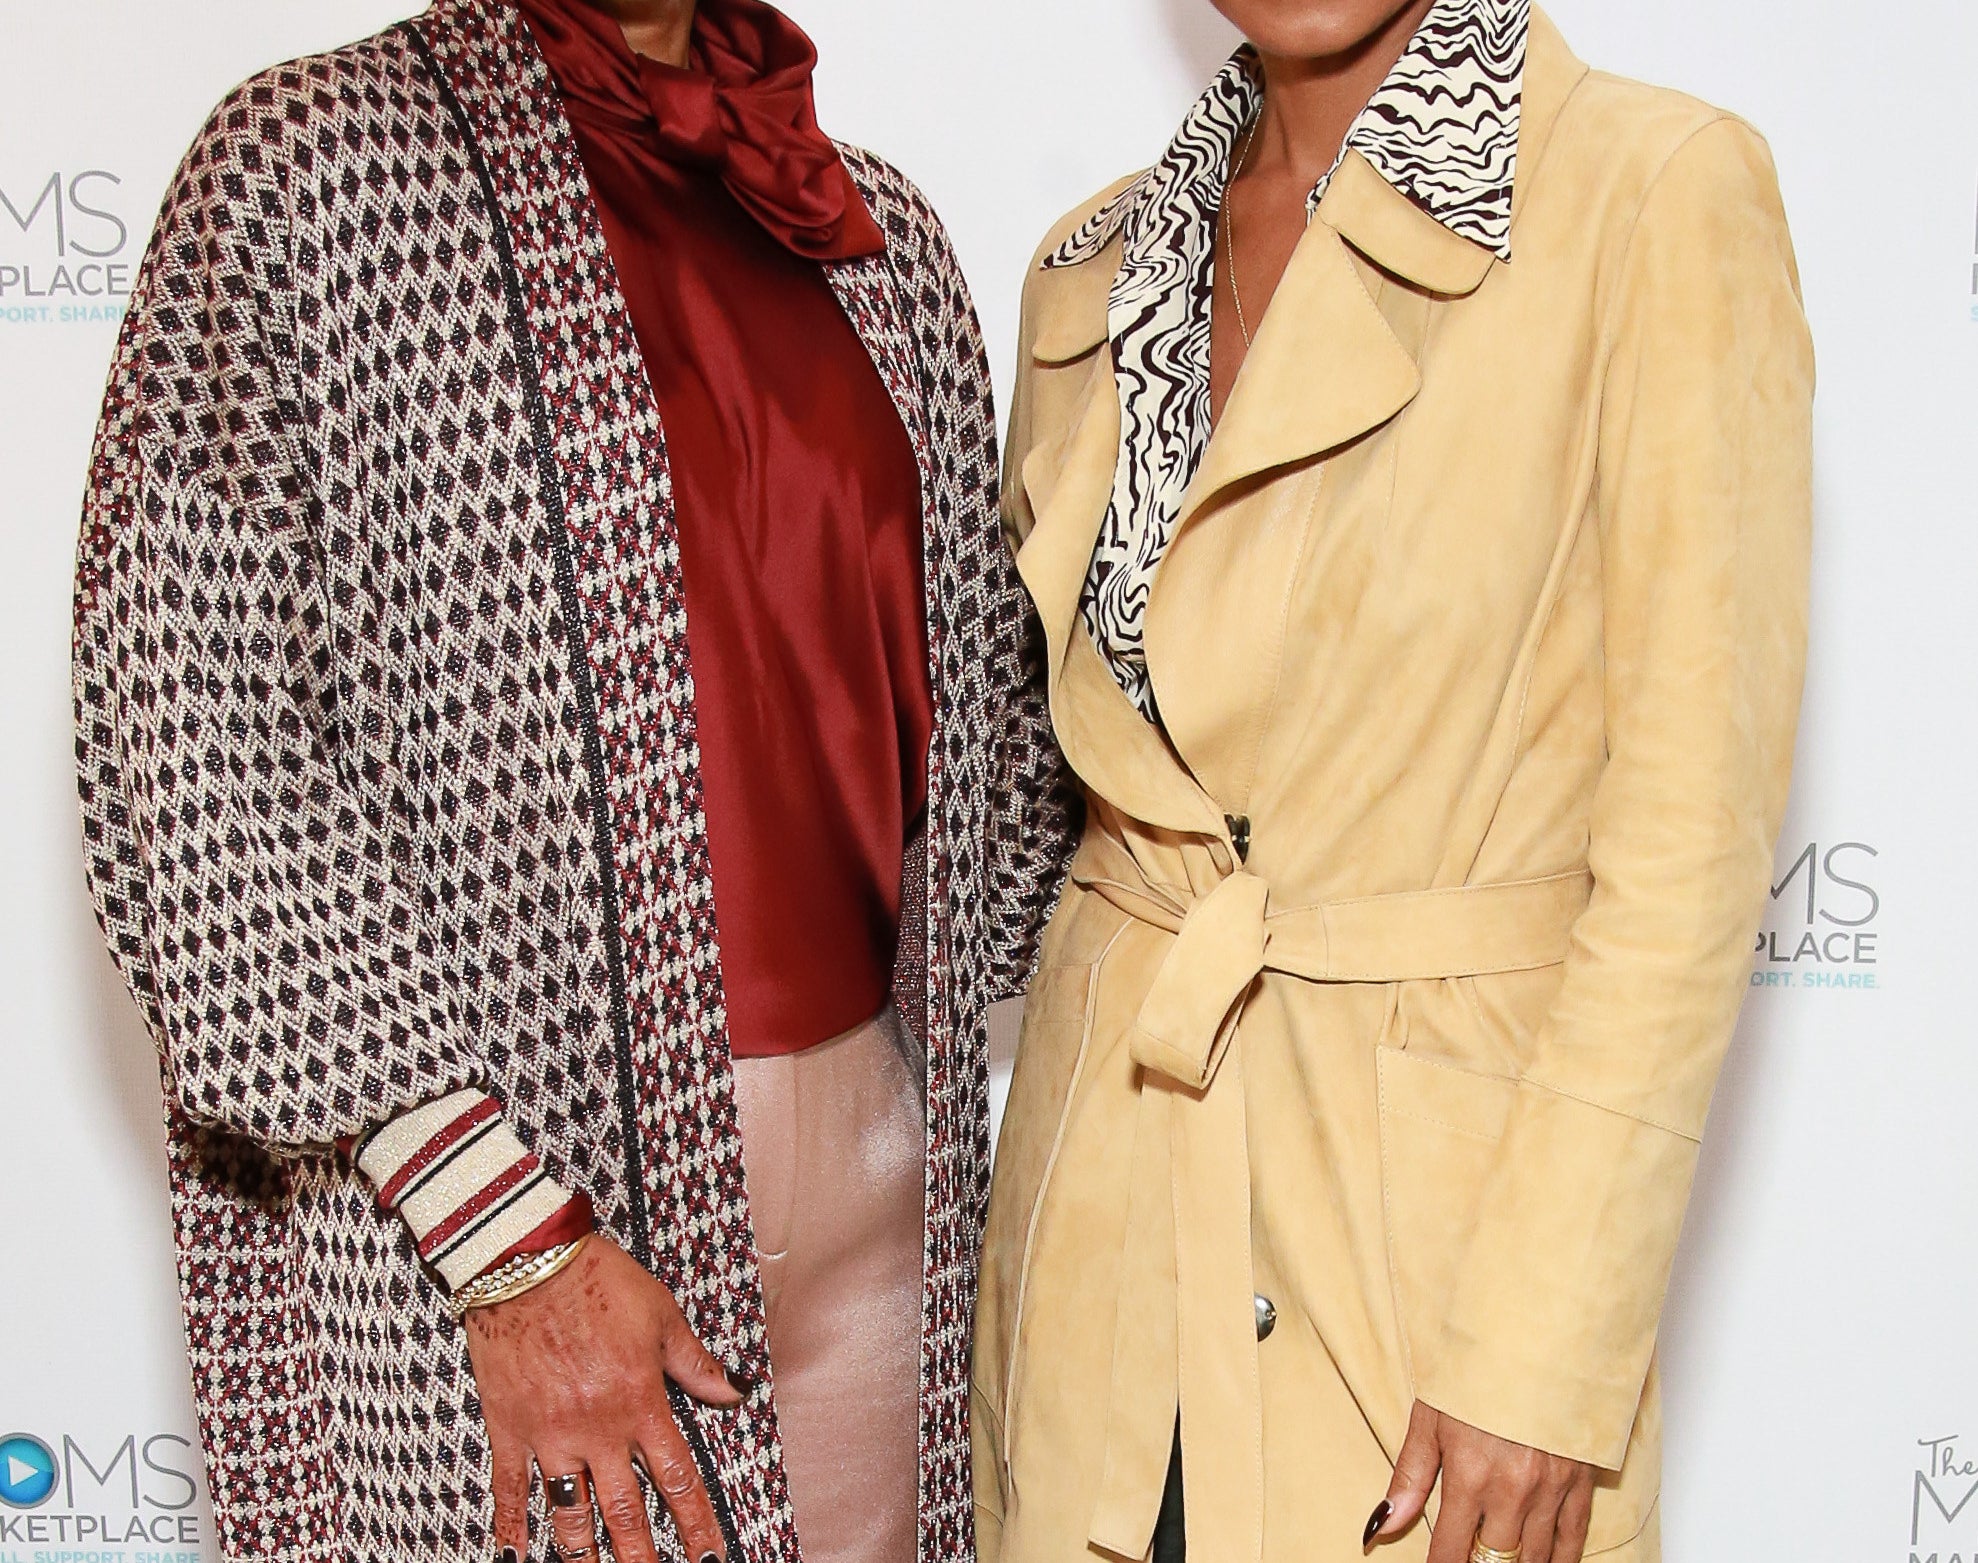 Jada and Gammy pose together at an event